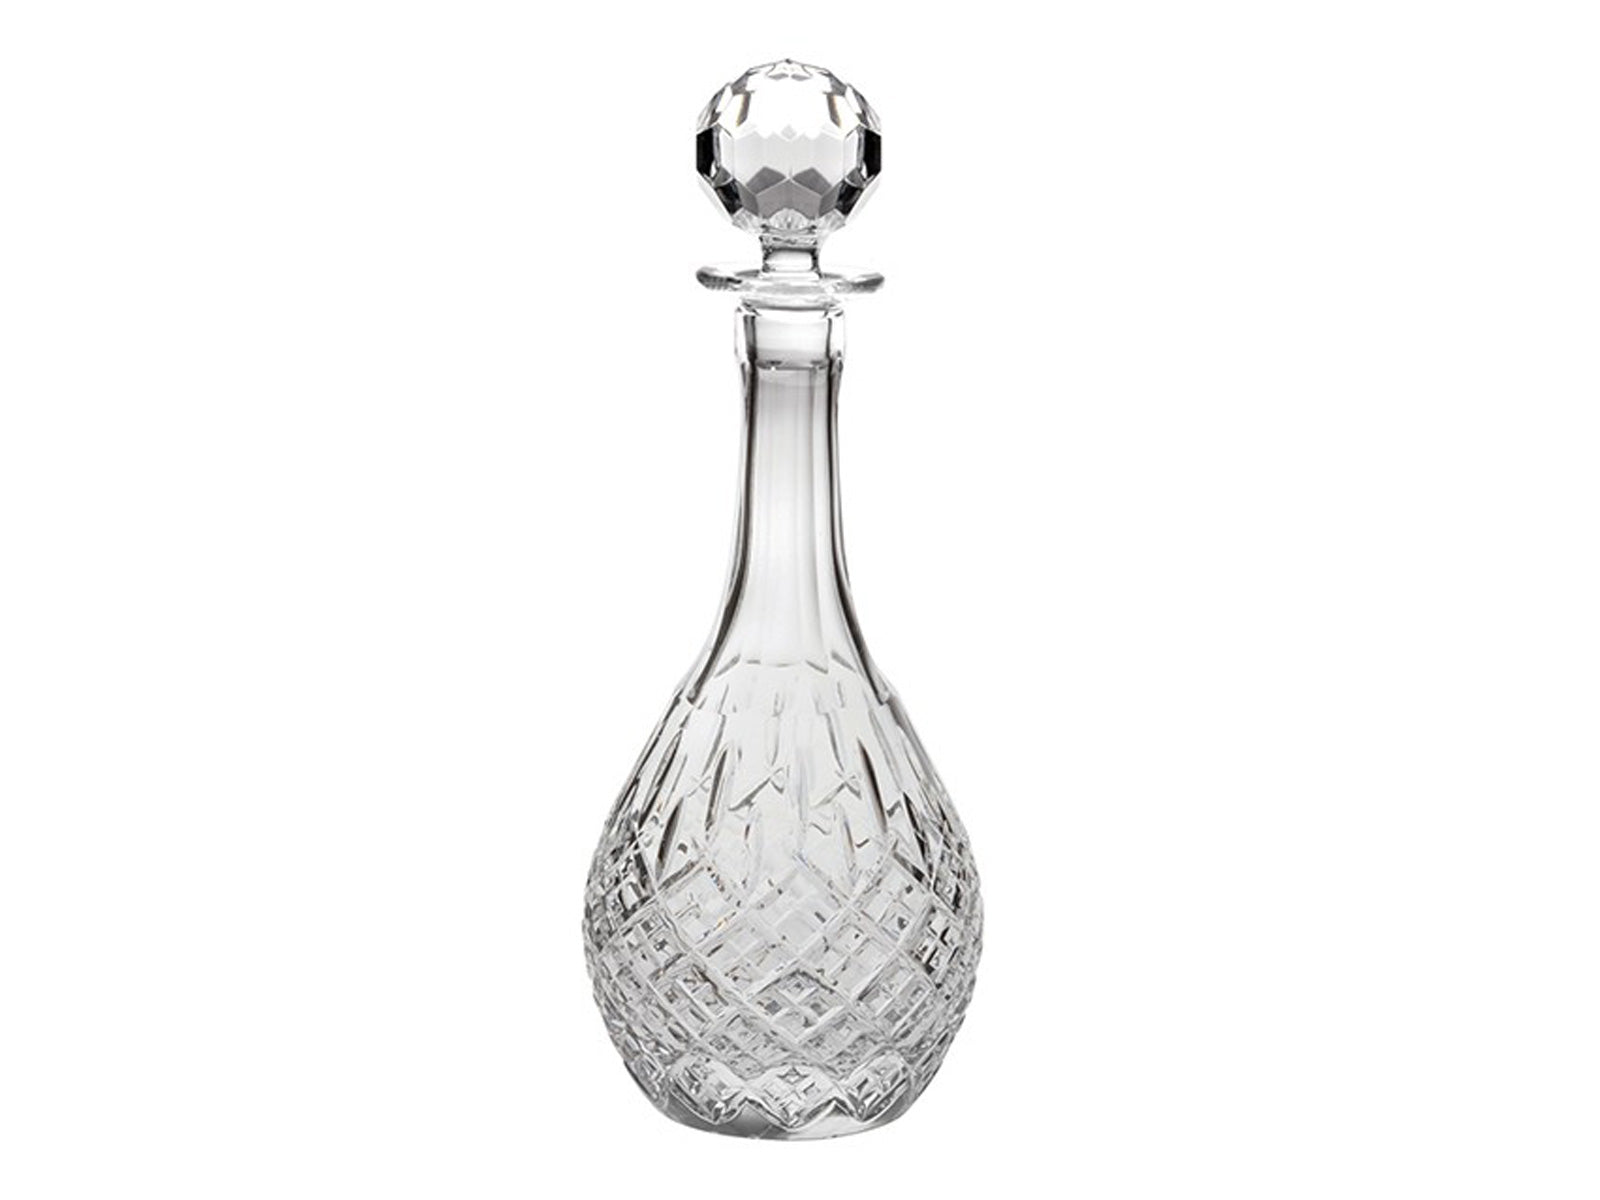 A crystal wine decanter with a long neck and tapered stopper. It is cut with a bed of diamonds around the base with single flicks reaching up towards the top.